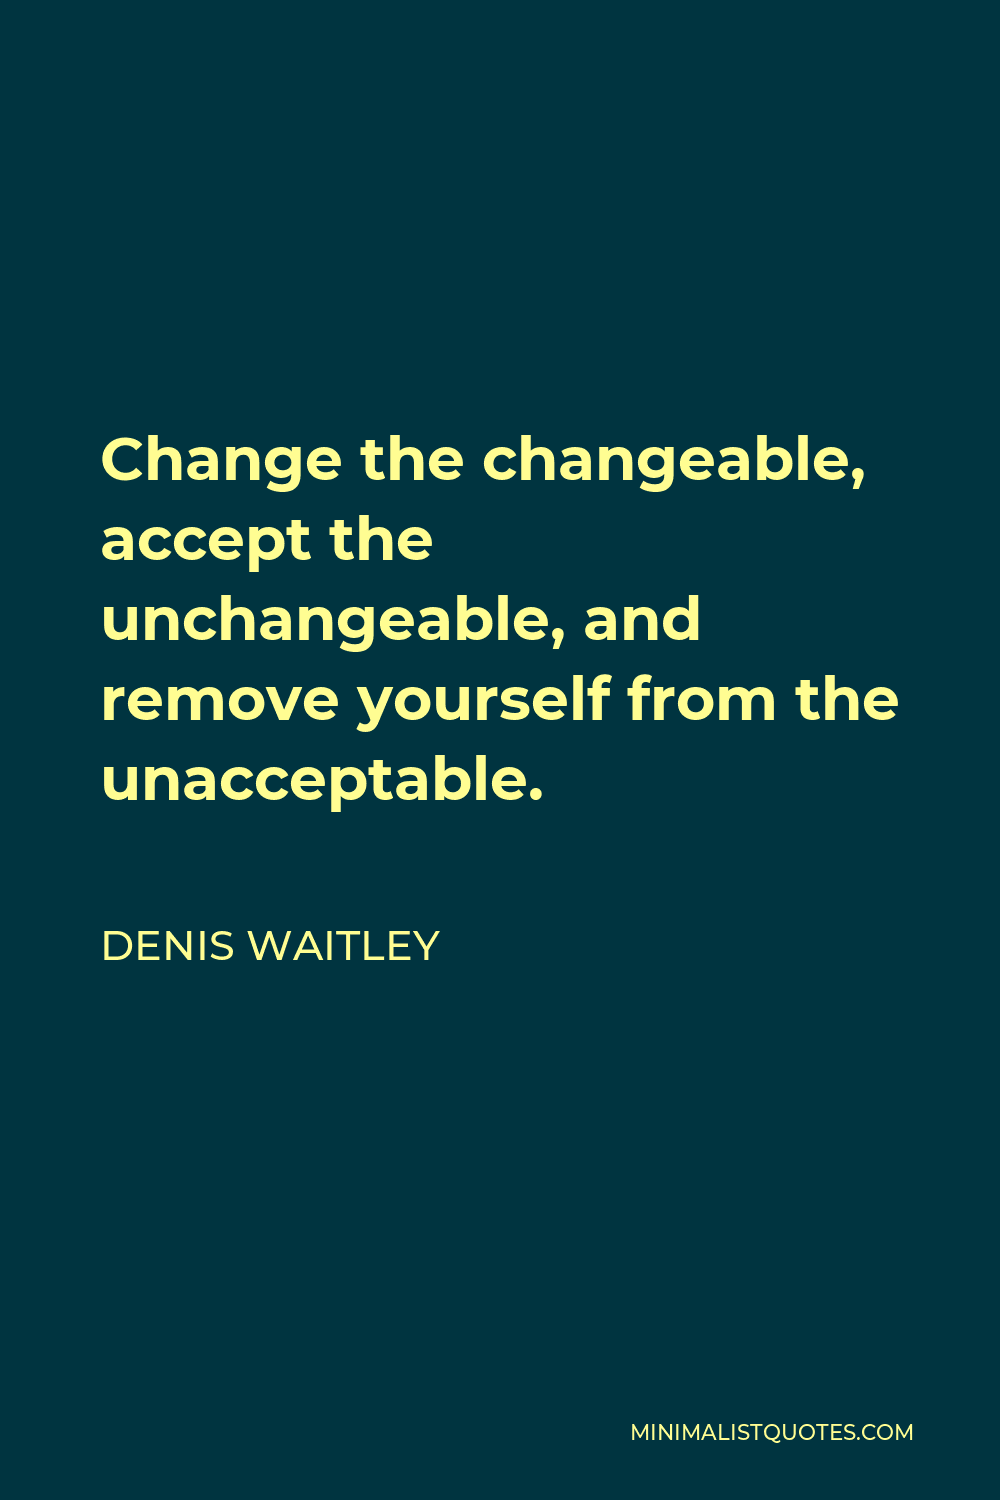 Denis Waitley Quote - Change the changeable, accept the unchangeable, and remove yourself from the unacceptable.